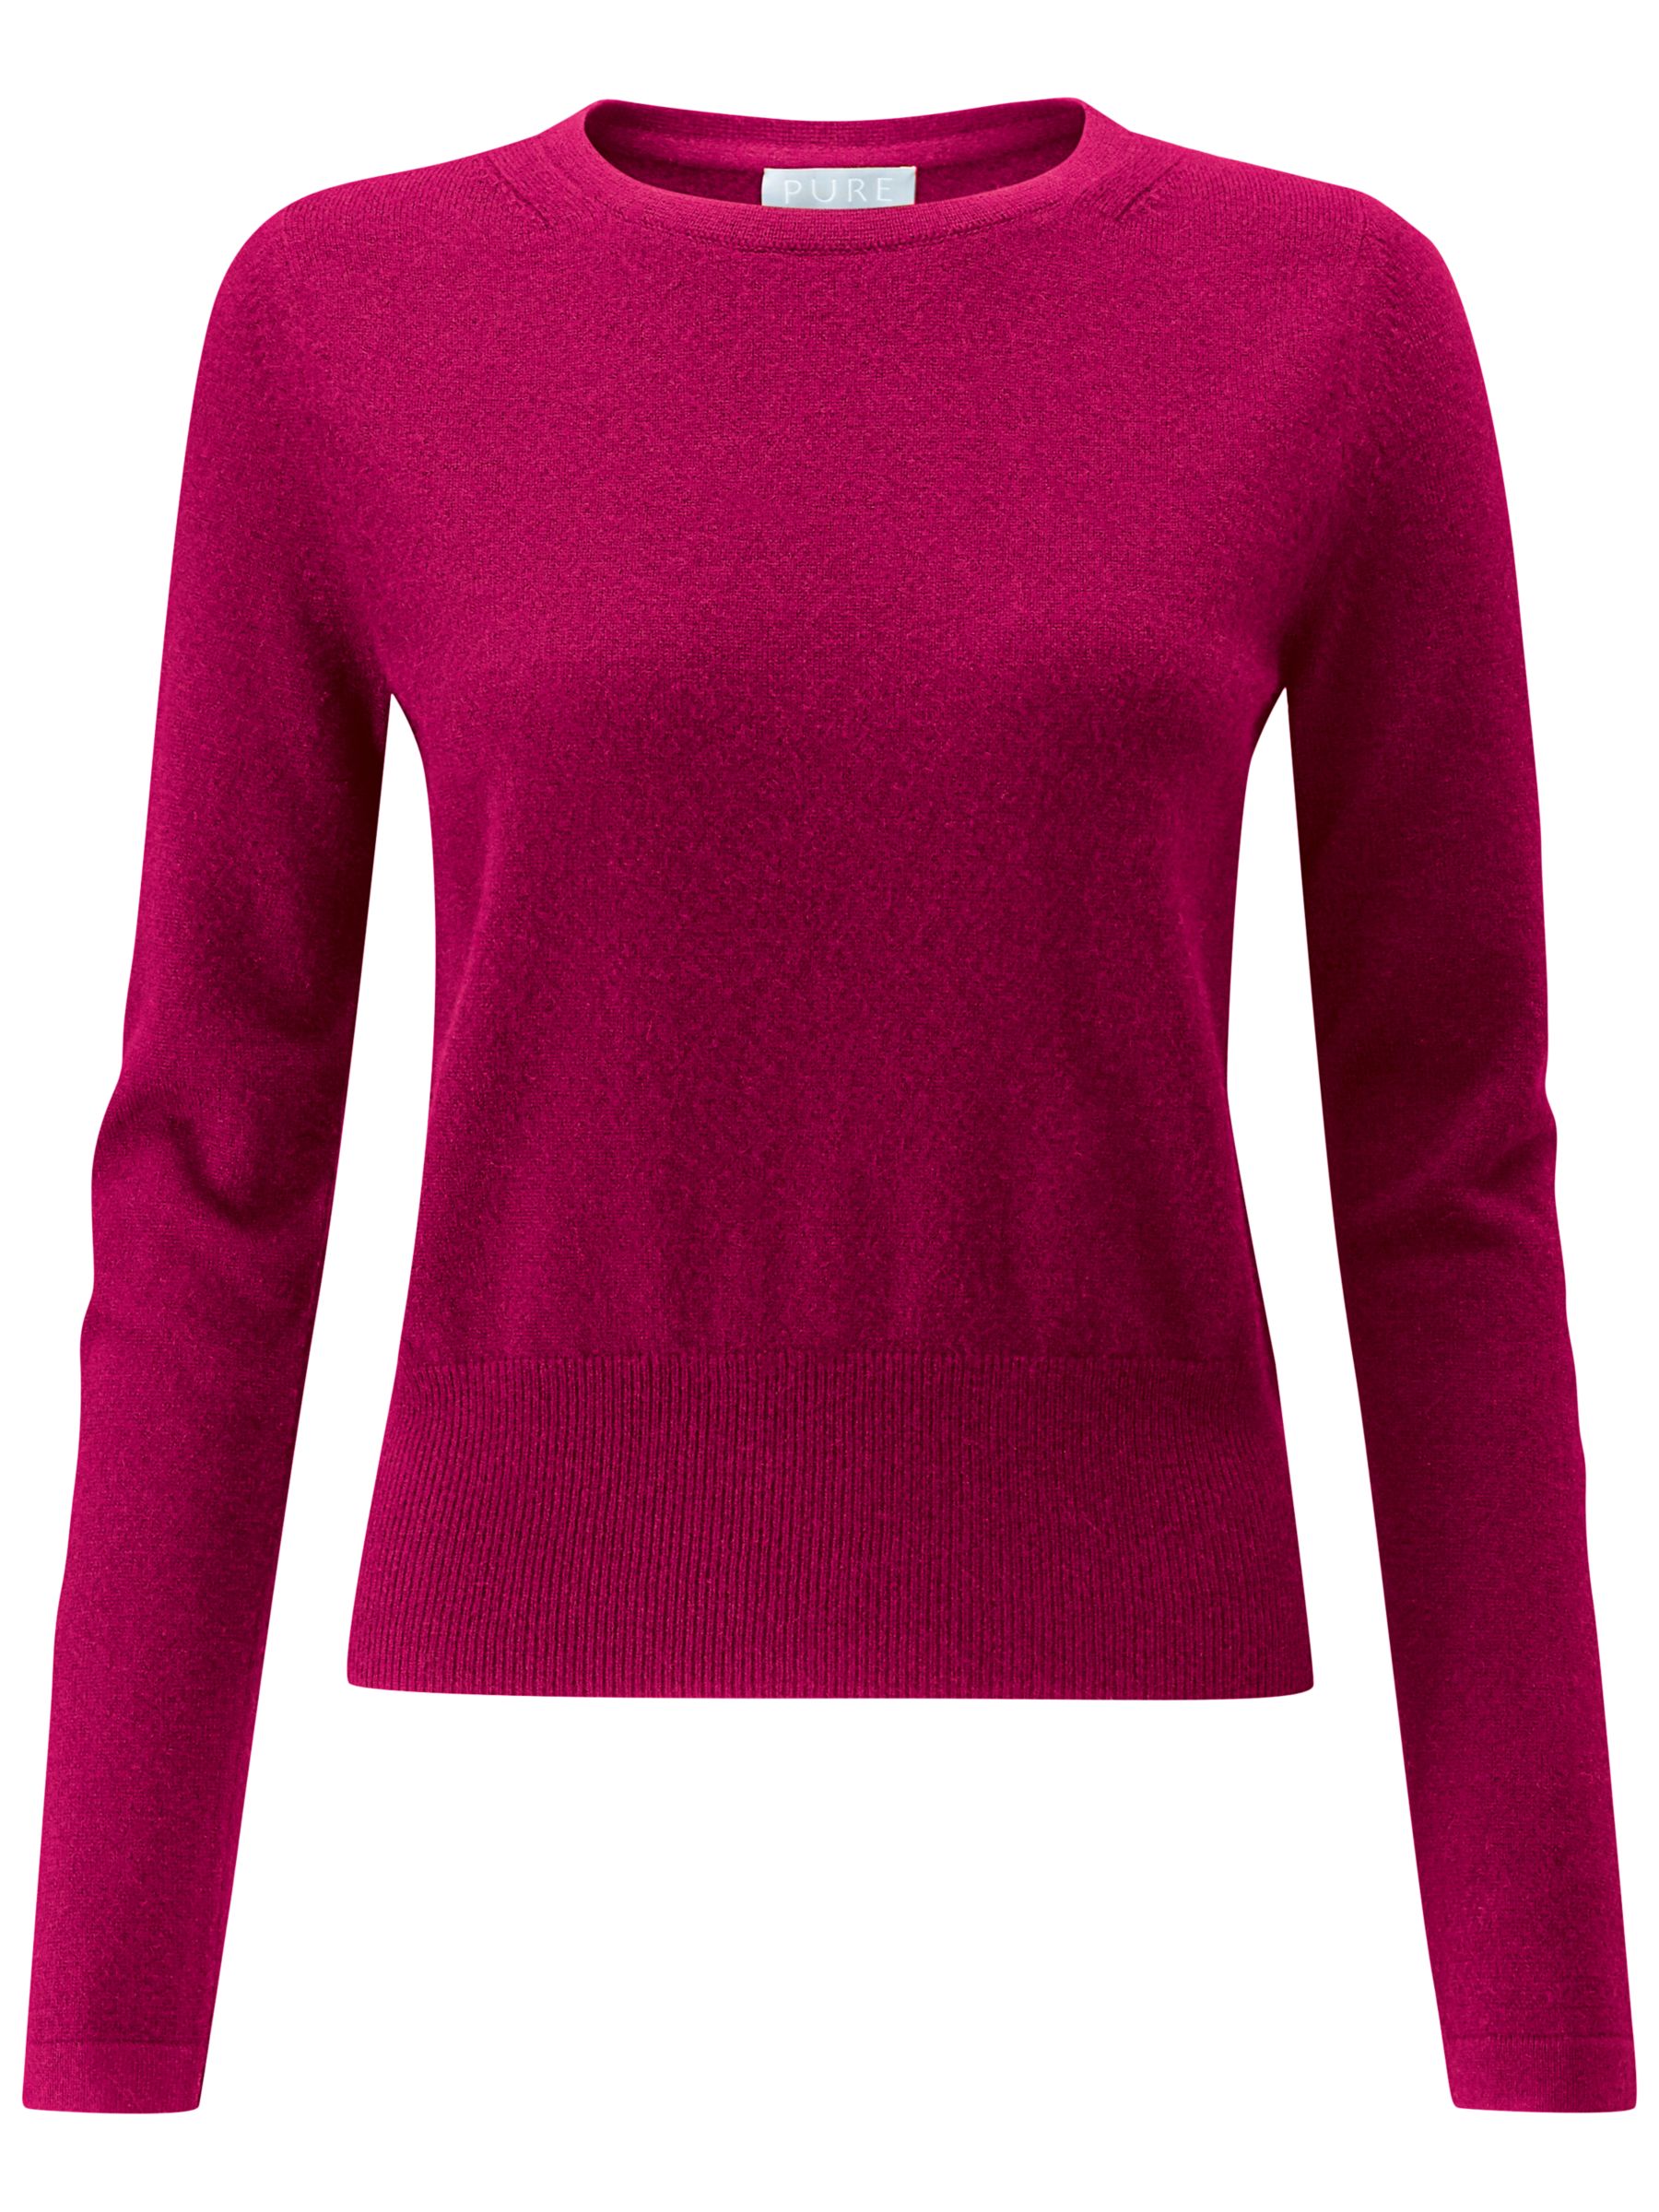 Pure Collection Cashmere Cropped Jumper at John Lewis & Partners